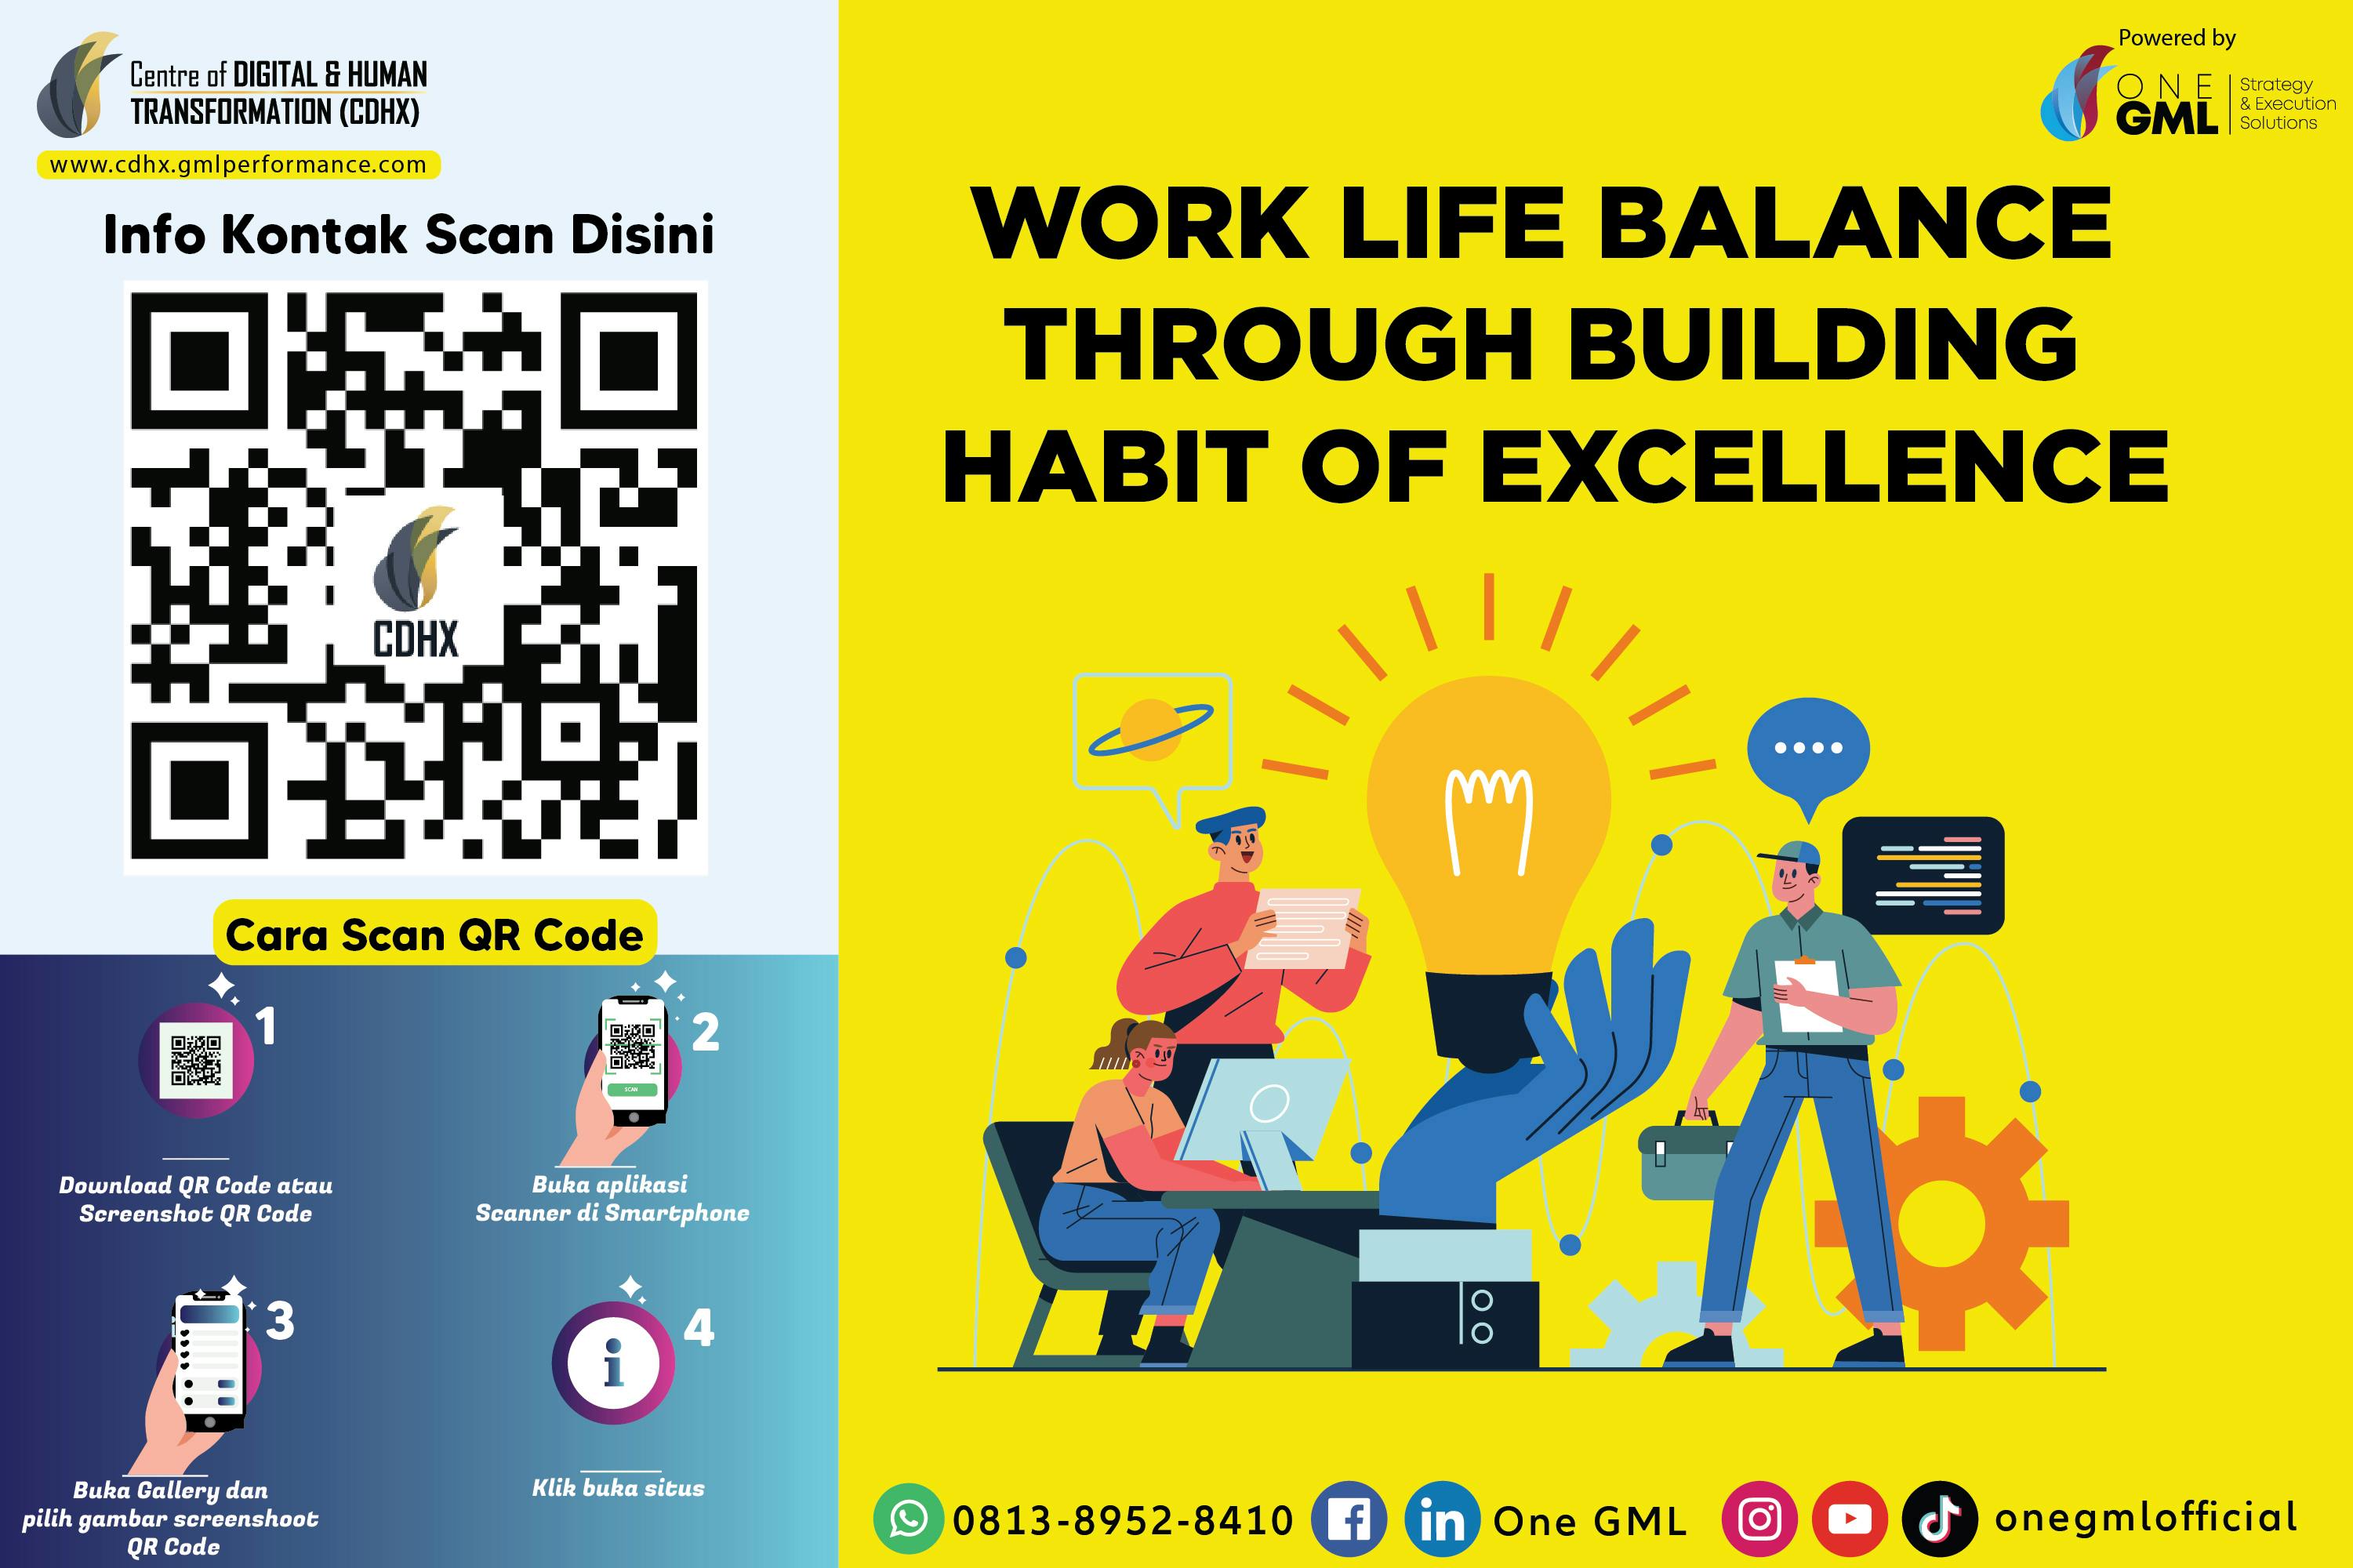 Work Life Balance through Building Habit of Excellence